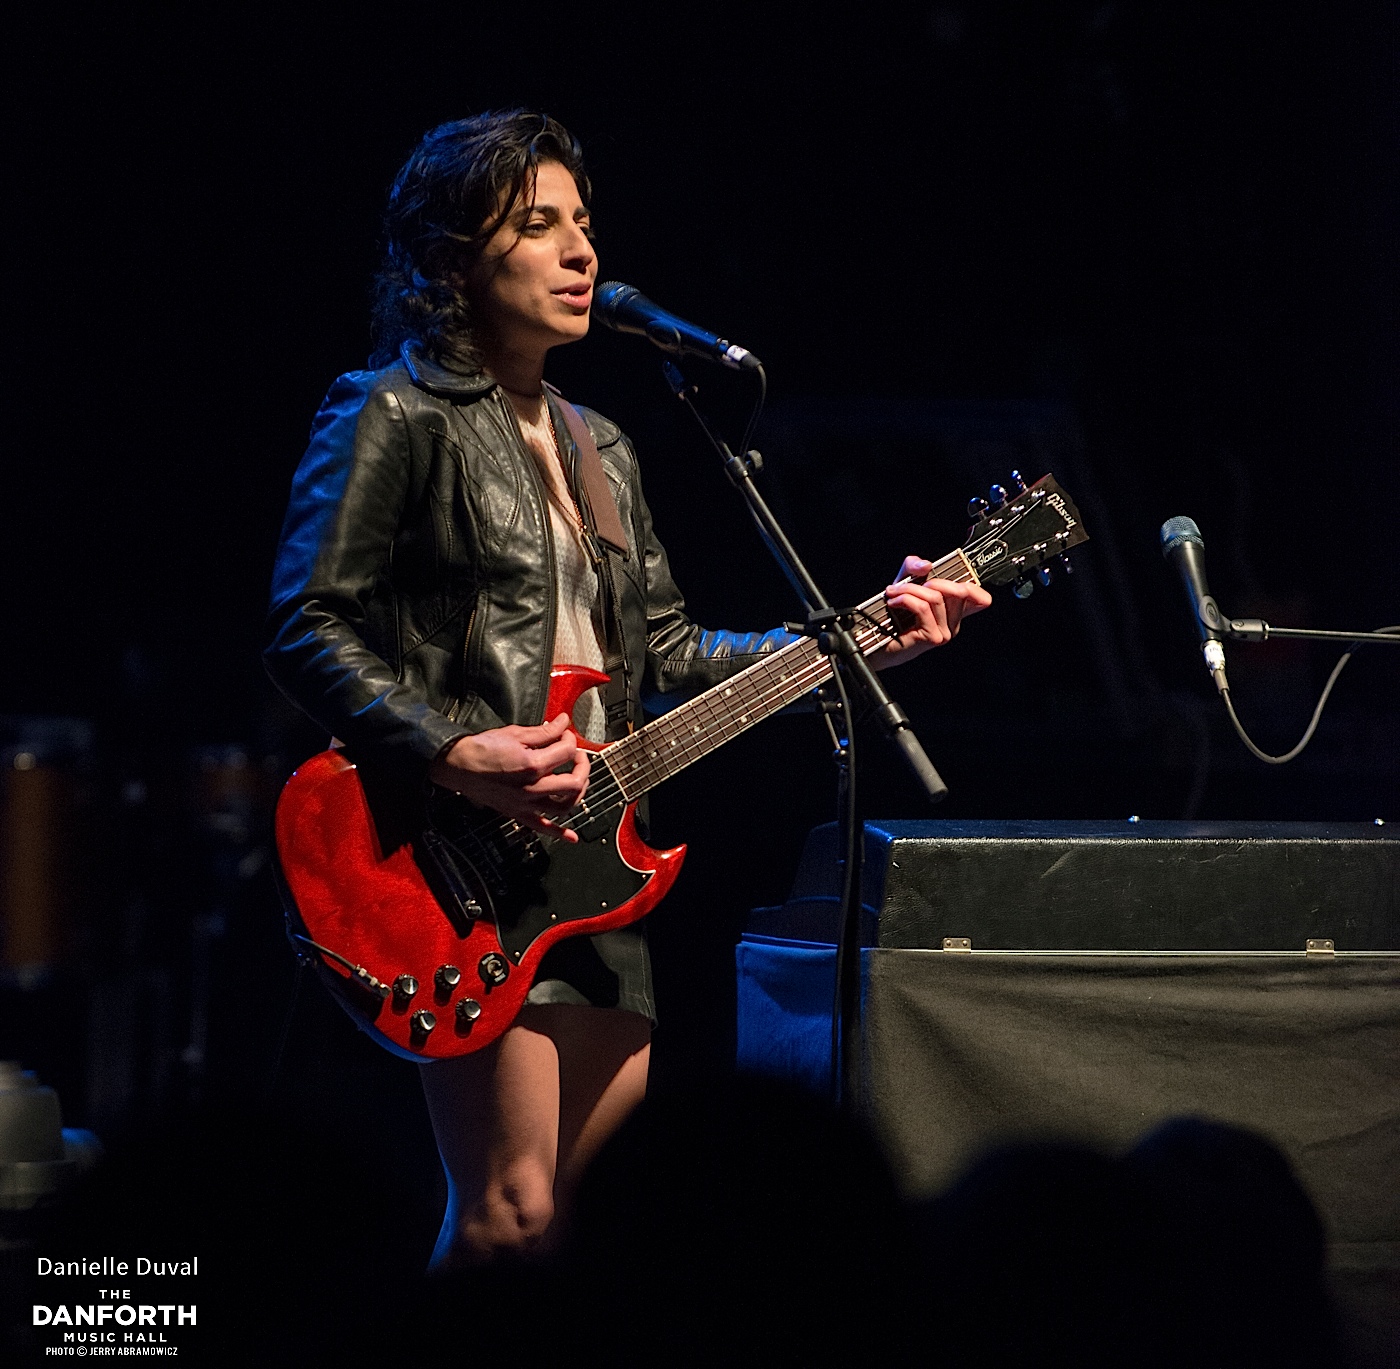 DANIELLE DUVAL opens for Serena Ryder at The Danforth Music Hall.